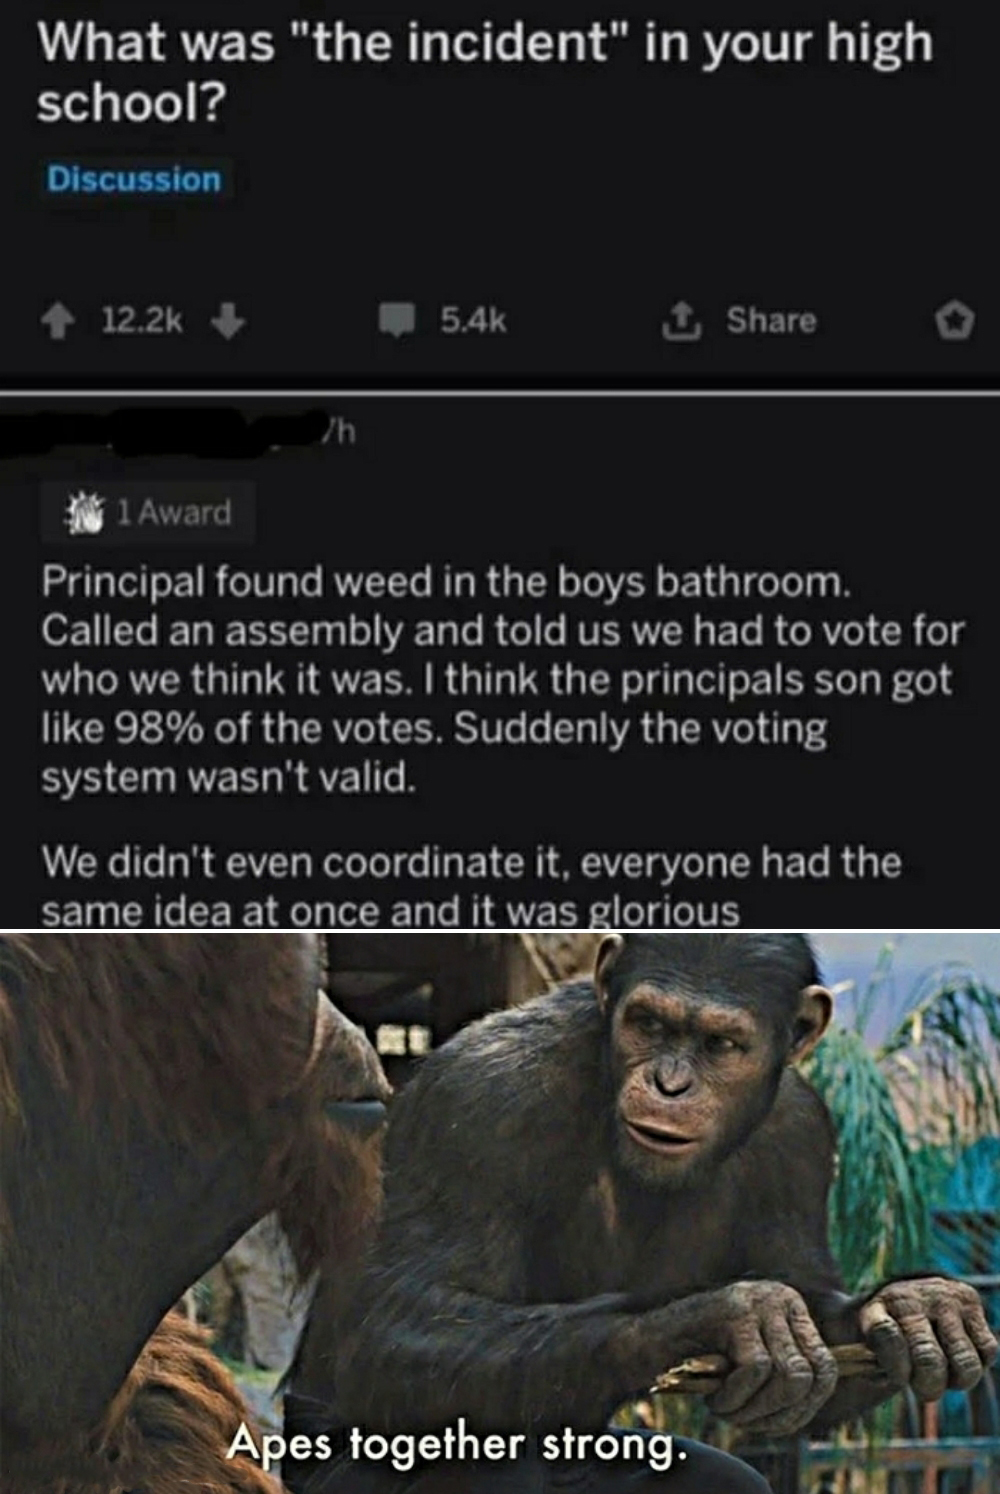 dank memes  - apes together strong meme - What was "the incident" in your high school? Discussion 1 Award Principal found weed in the boys bathroom. Called an assembly and told us we had to vote for who we think it was. I think the principals son got 98% 